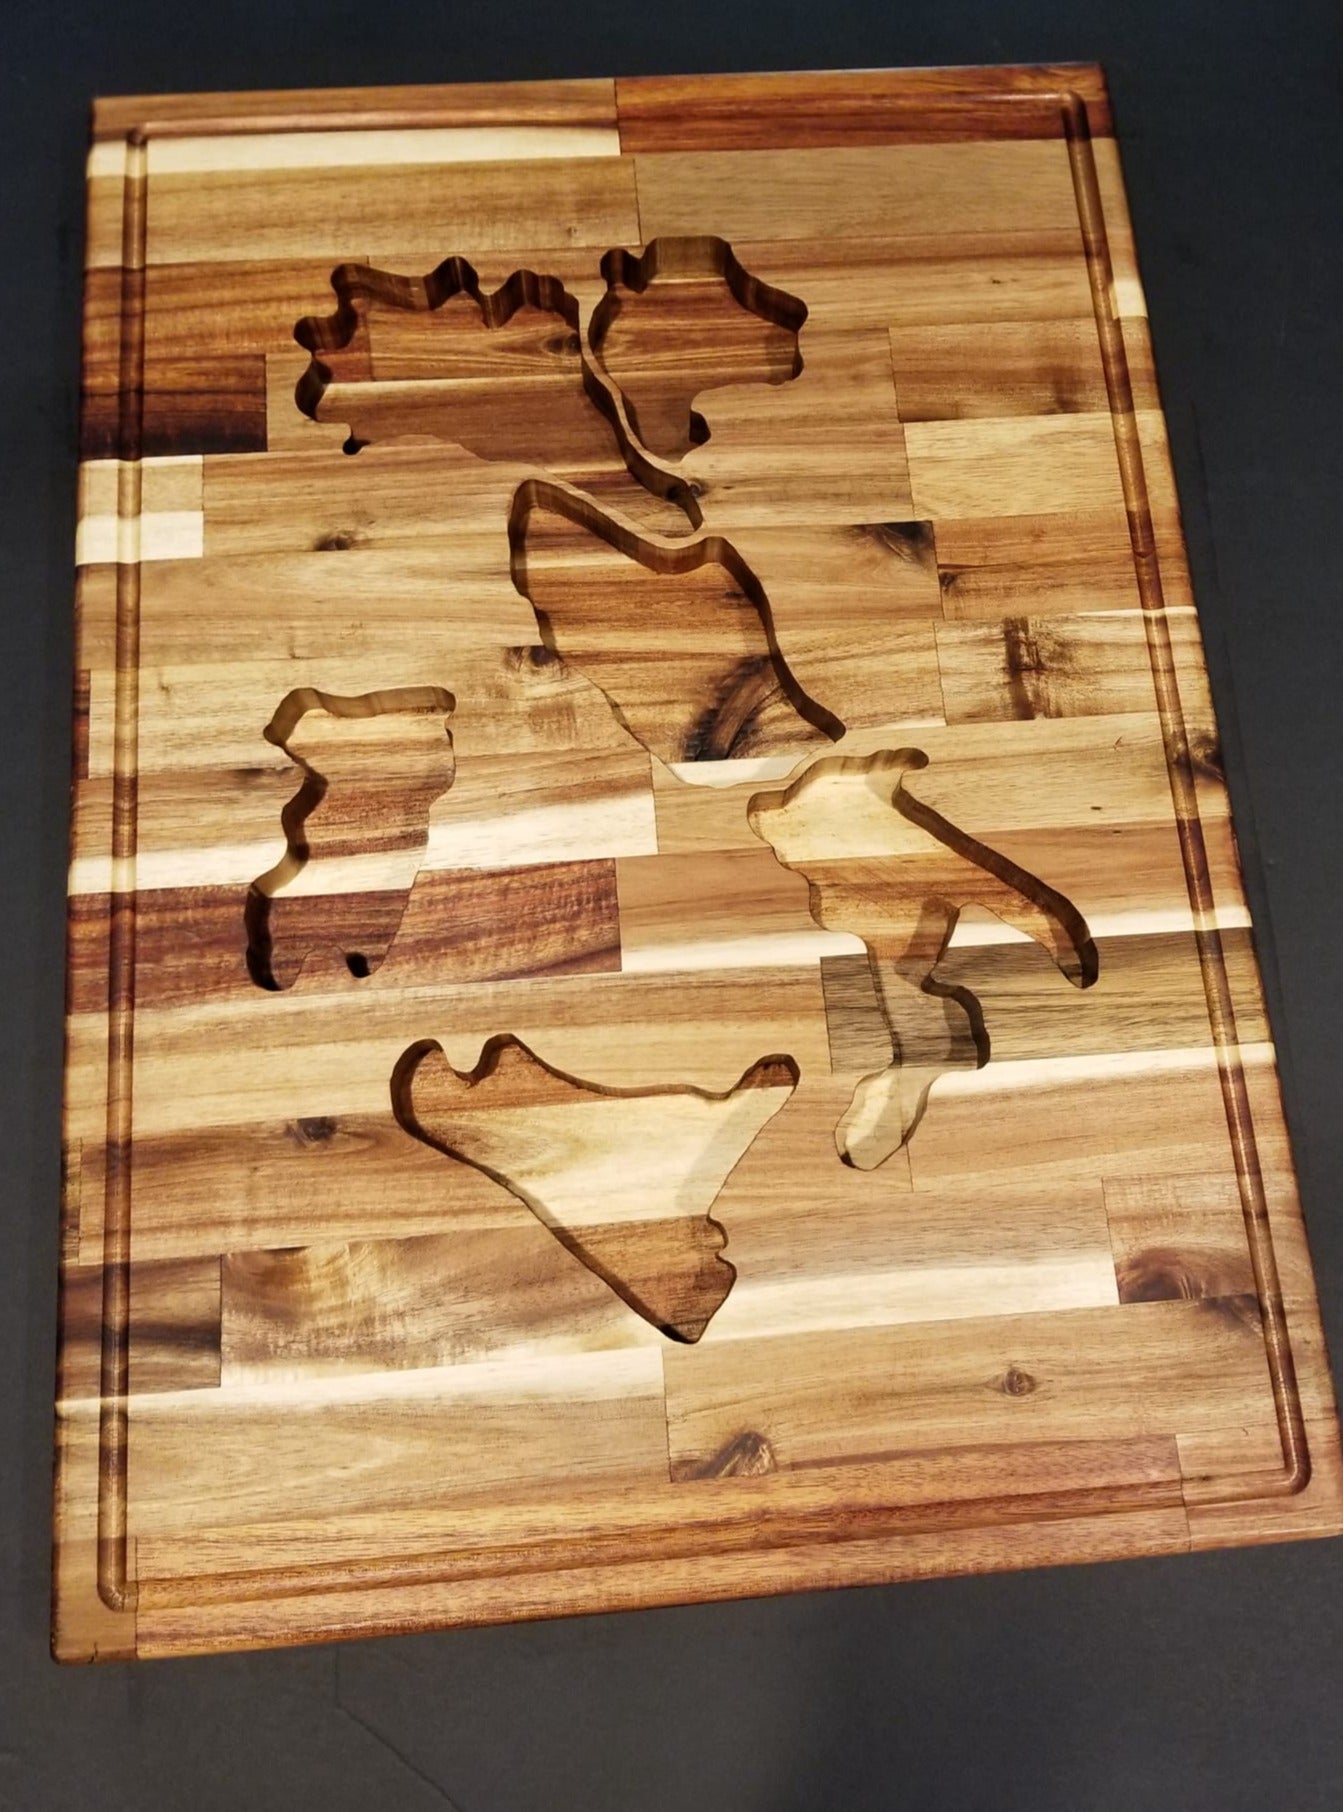 Personalized Cutting Board Gourmet Gift Italy Shaped 